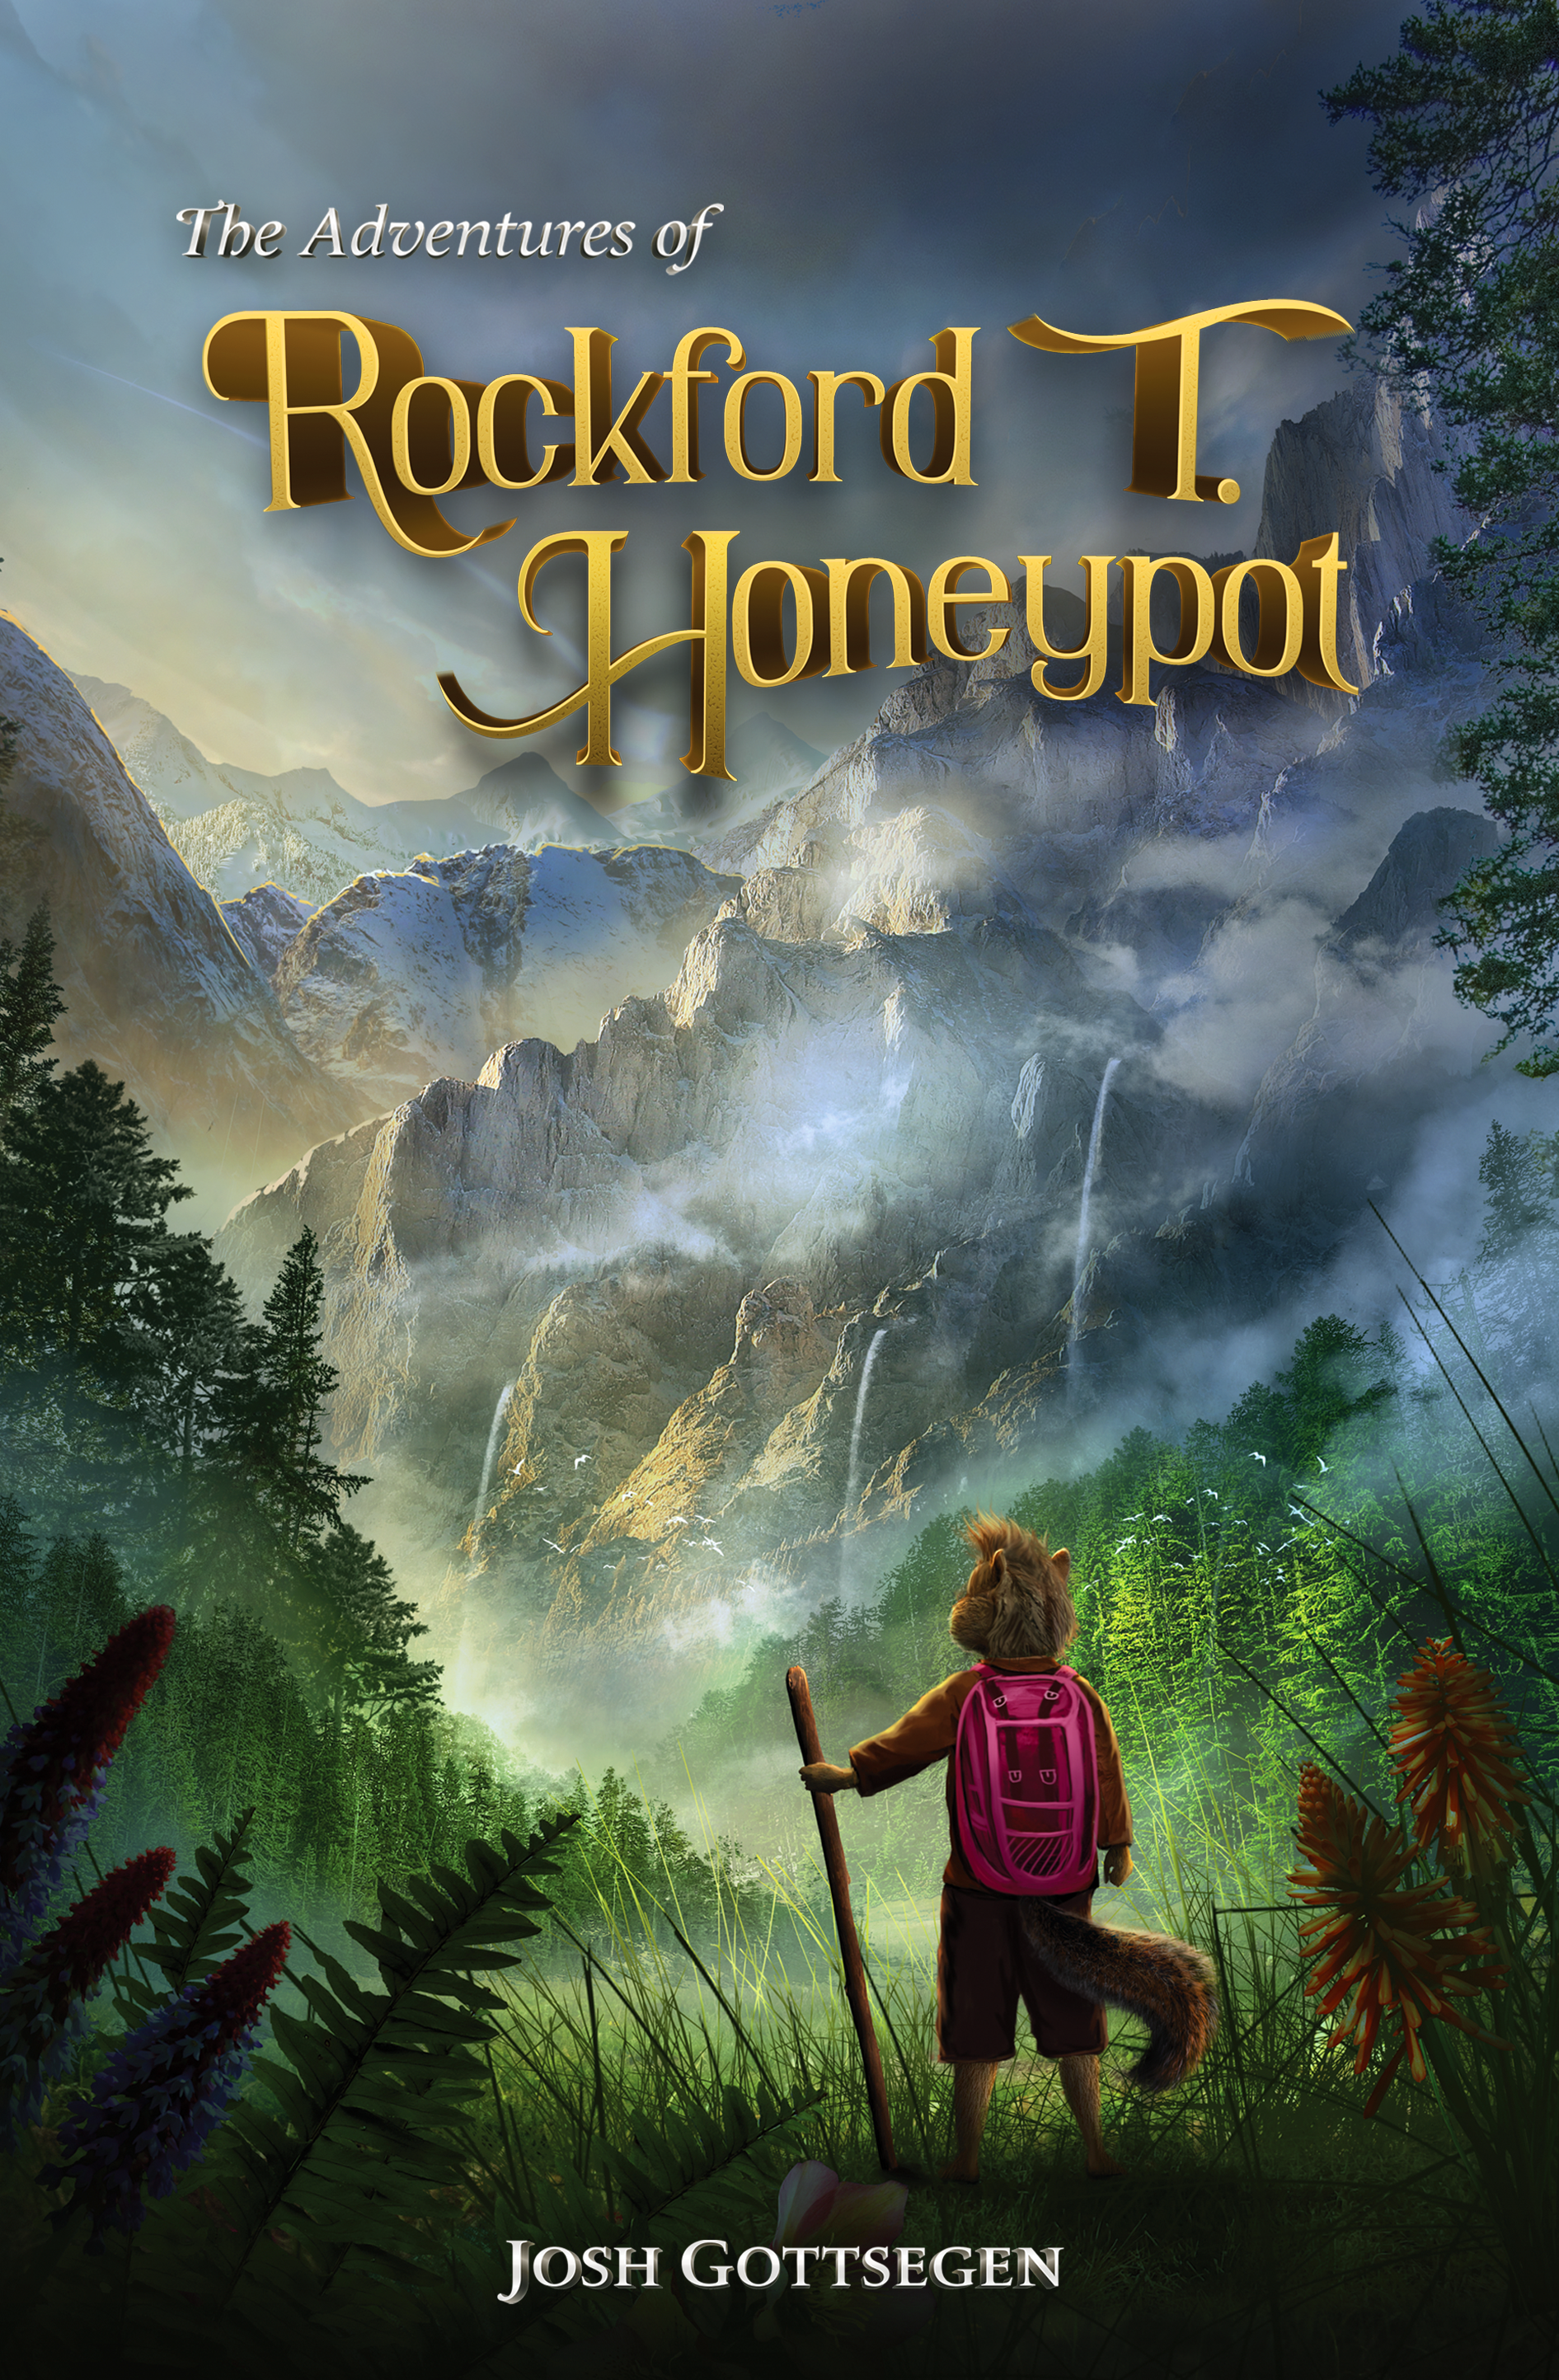 The Adventures of Rockford T. Honeypot - Tropland Universe